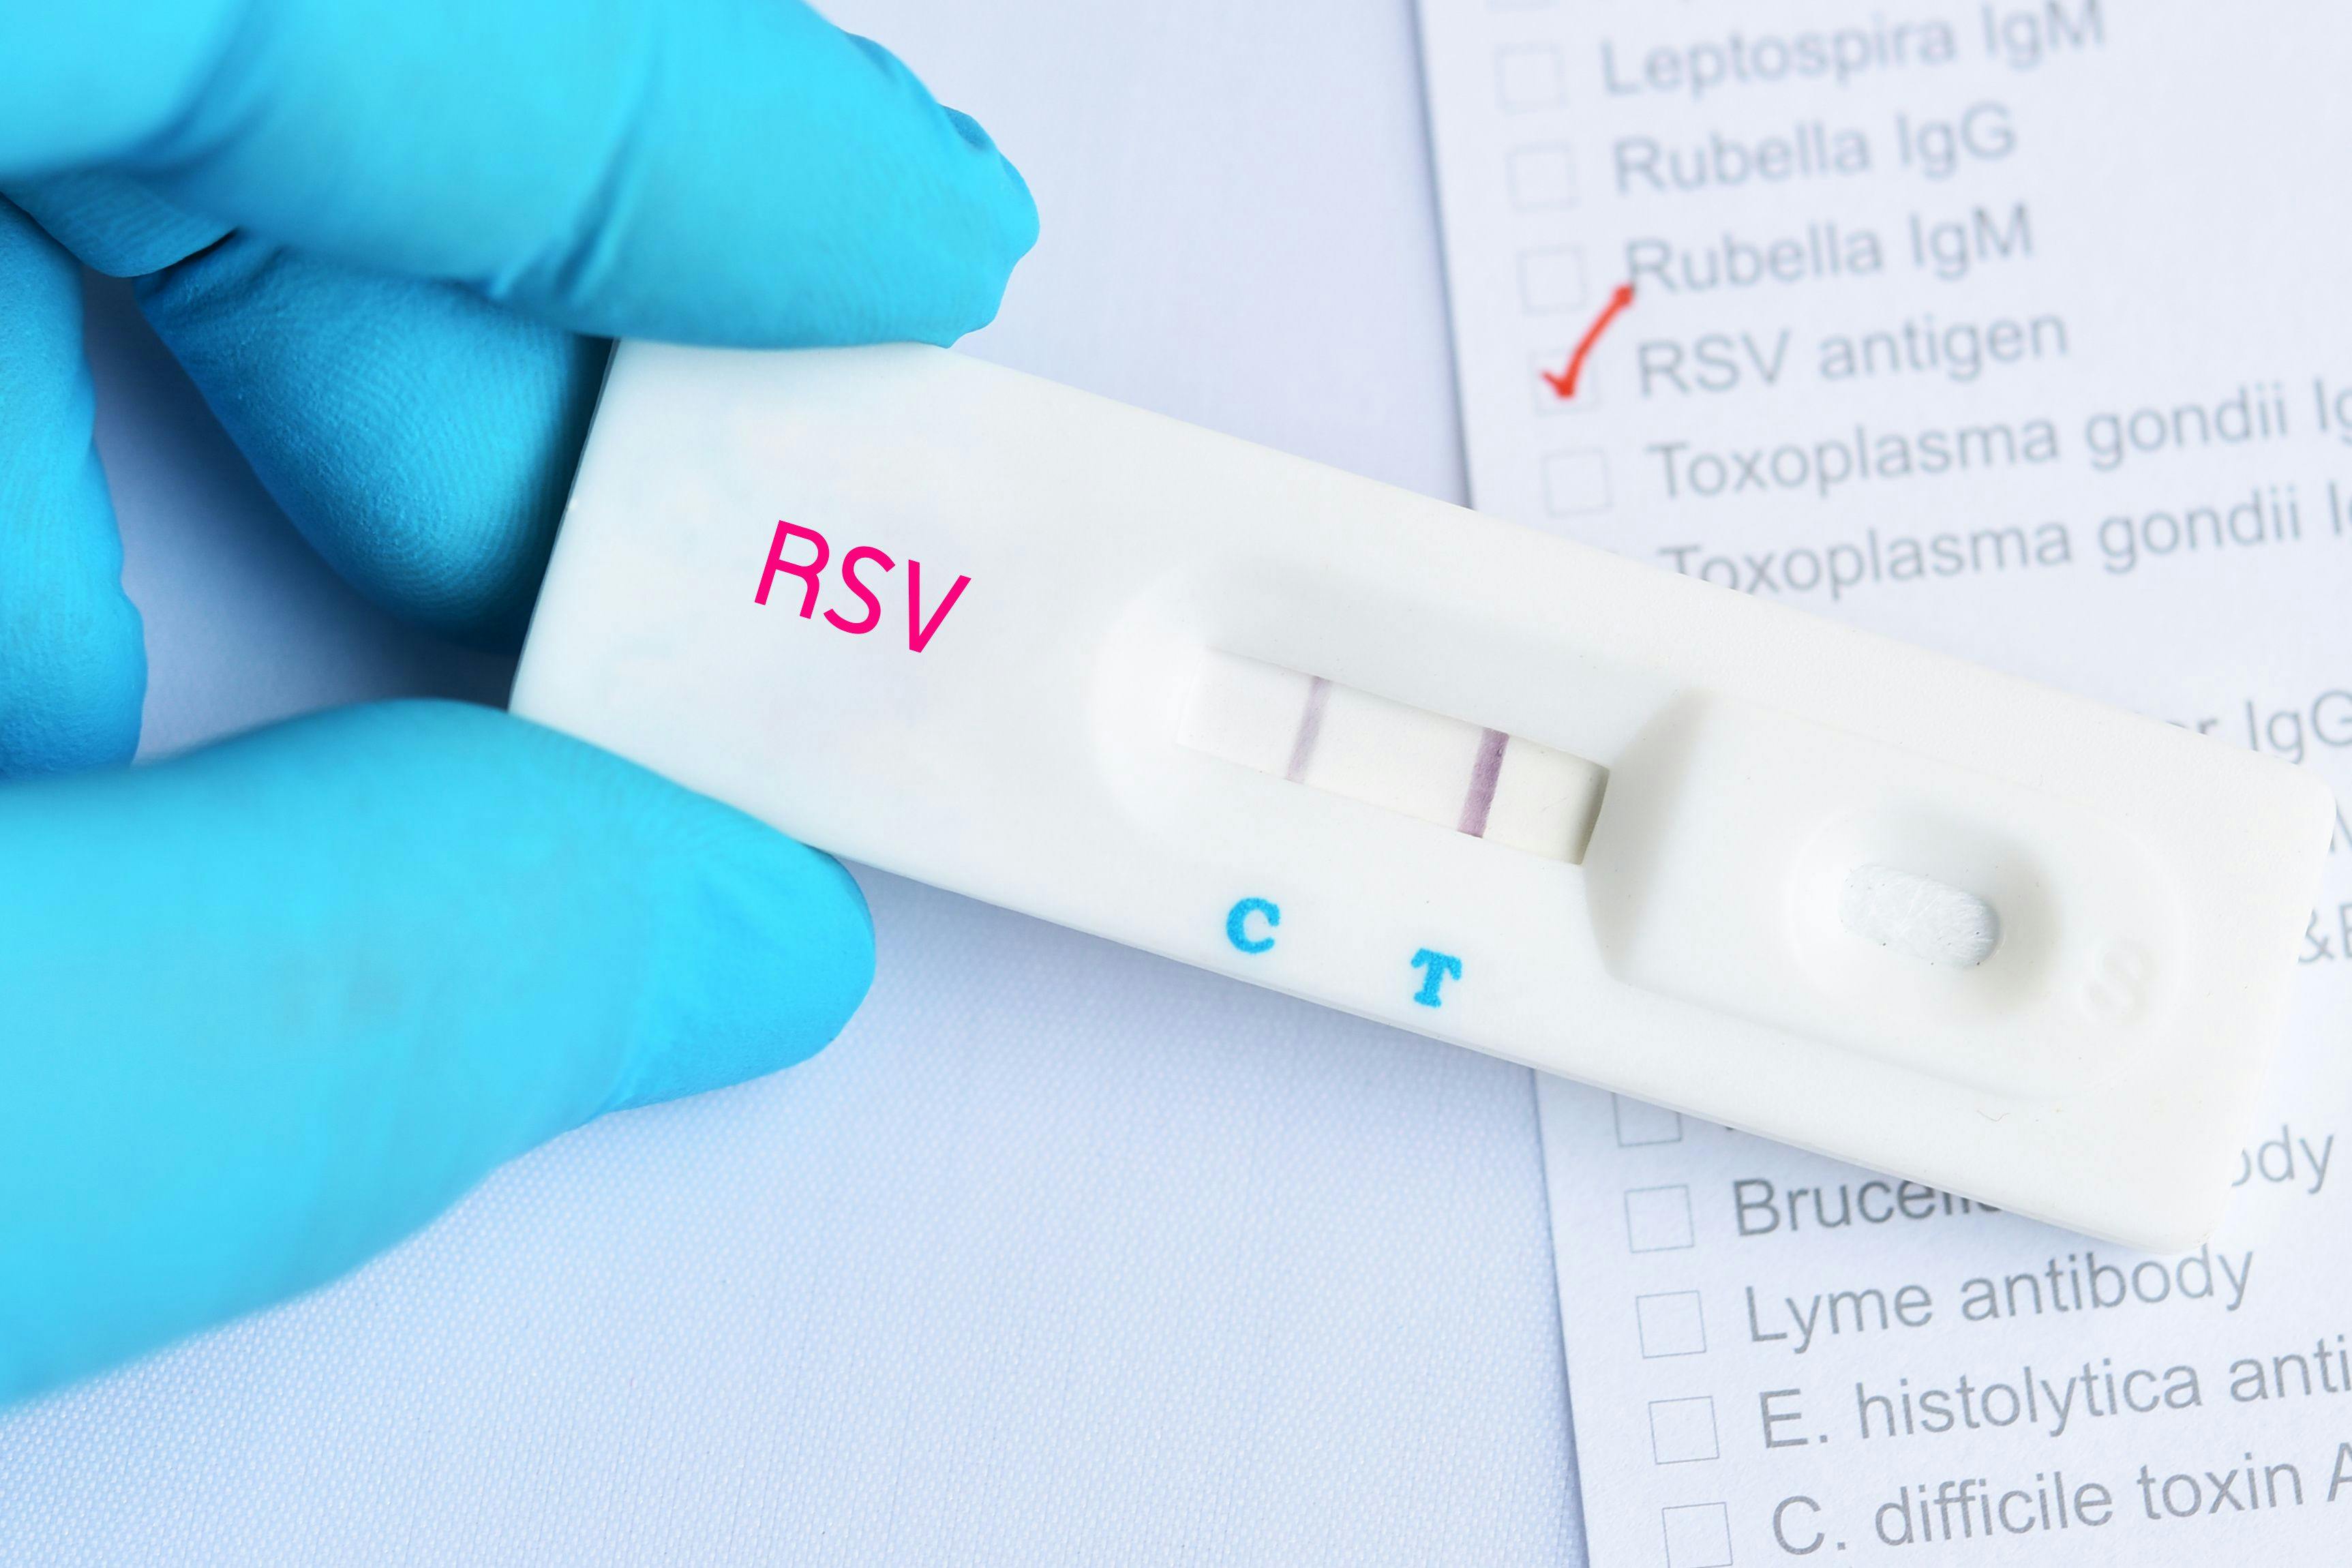 RSV positive test result by using rapid test cassette, diagnosis for respiratory disease - Image credit: Jarun011 | stock.adobe.com 